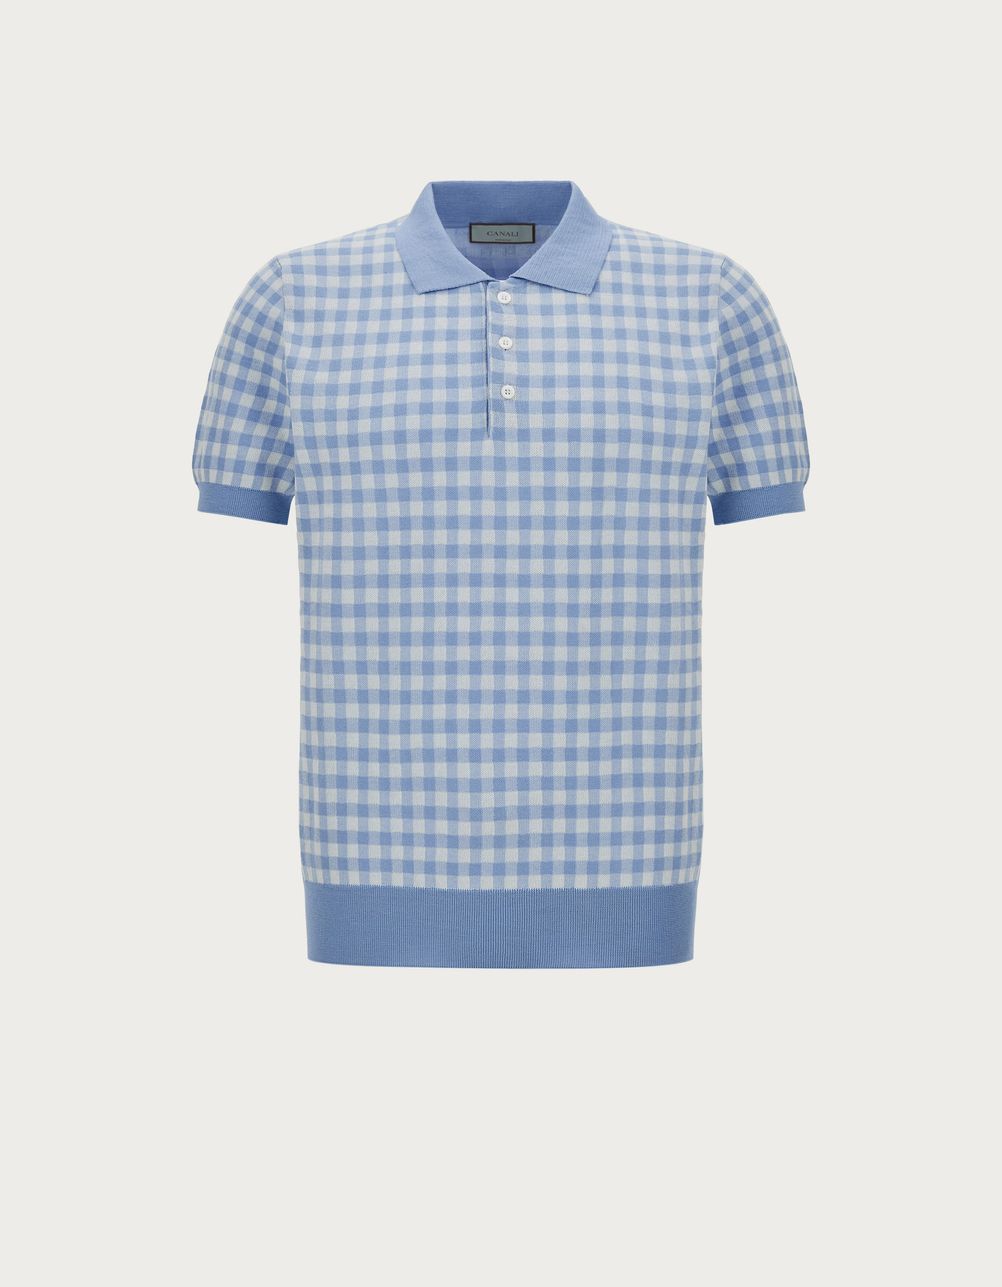 Light blue and white polo shirt in jacquard cotton